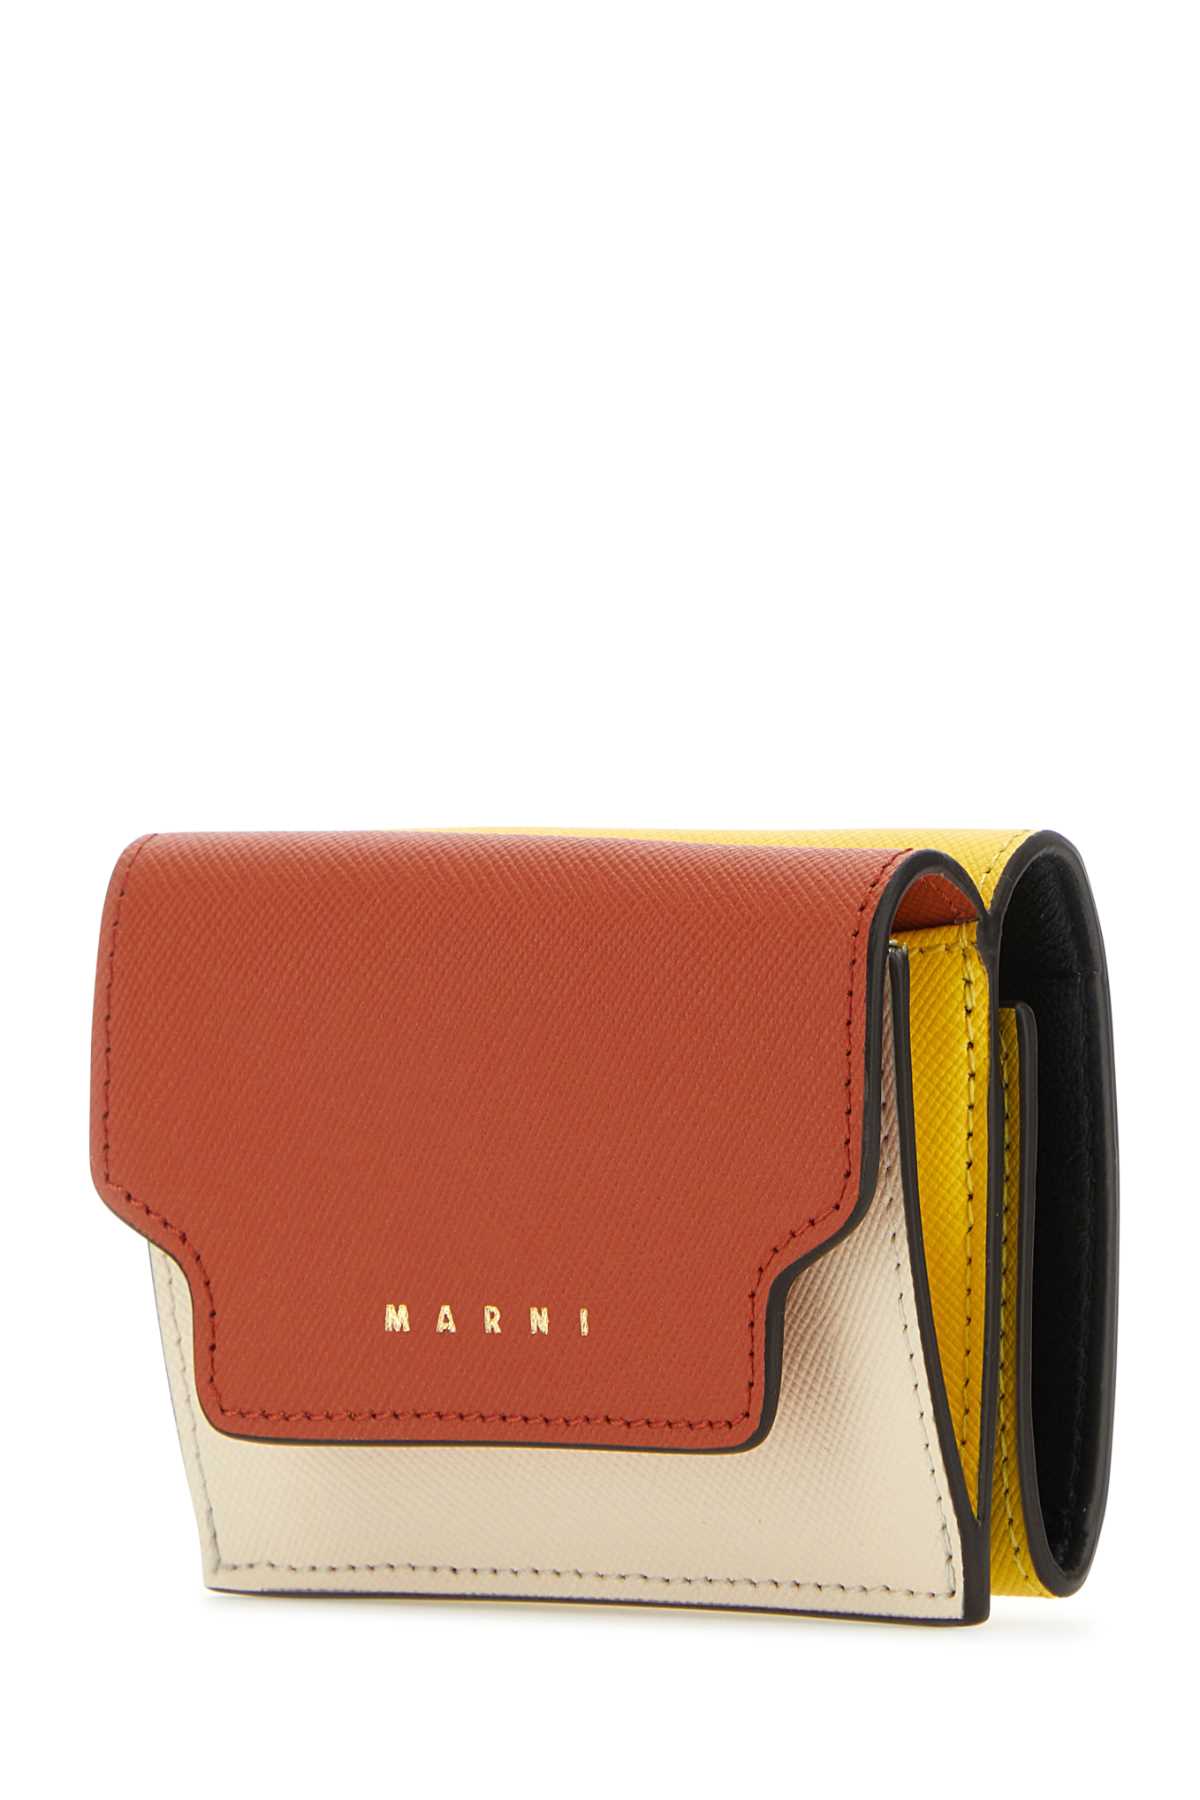 Marni Multicolor Leather Wallet In Tabascotalclemon